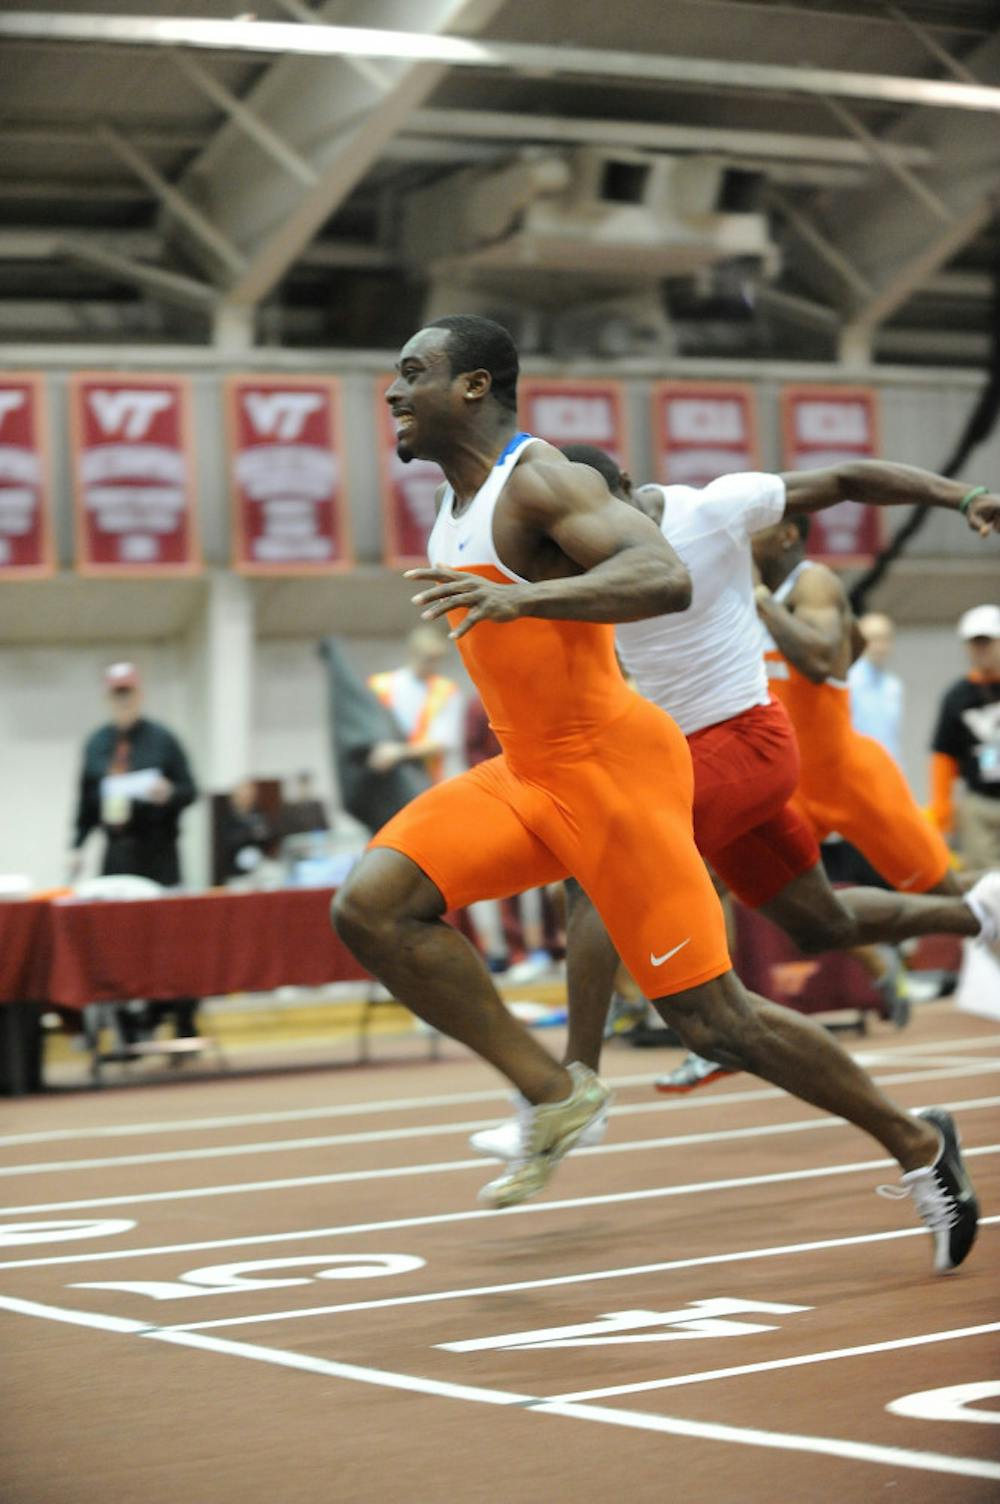 Florida's Jeff Demps qualifies for the NCAA Indoor National Championships in the 60-meter dash, running the second-fastest time in the country this season.